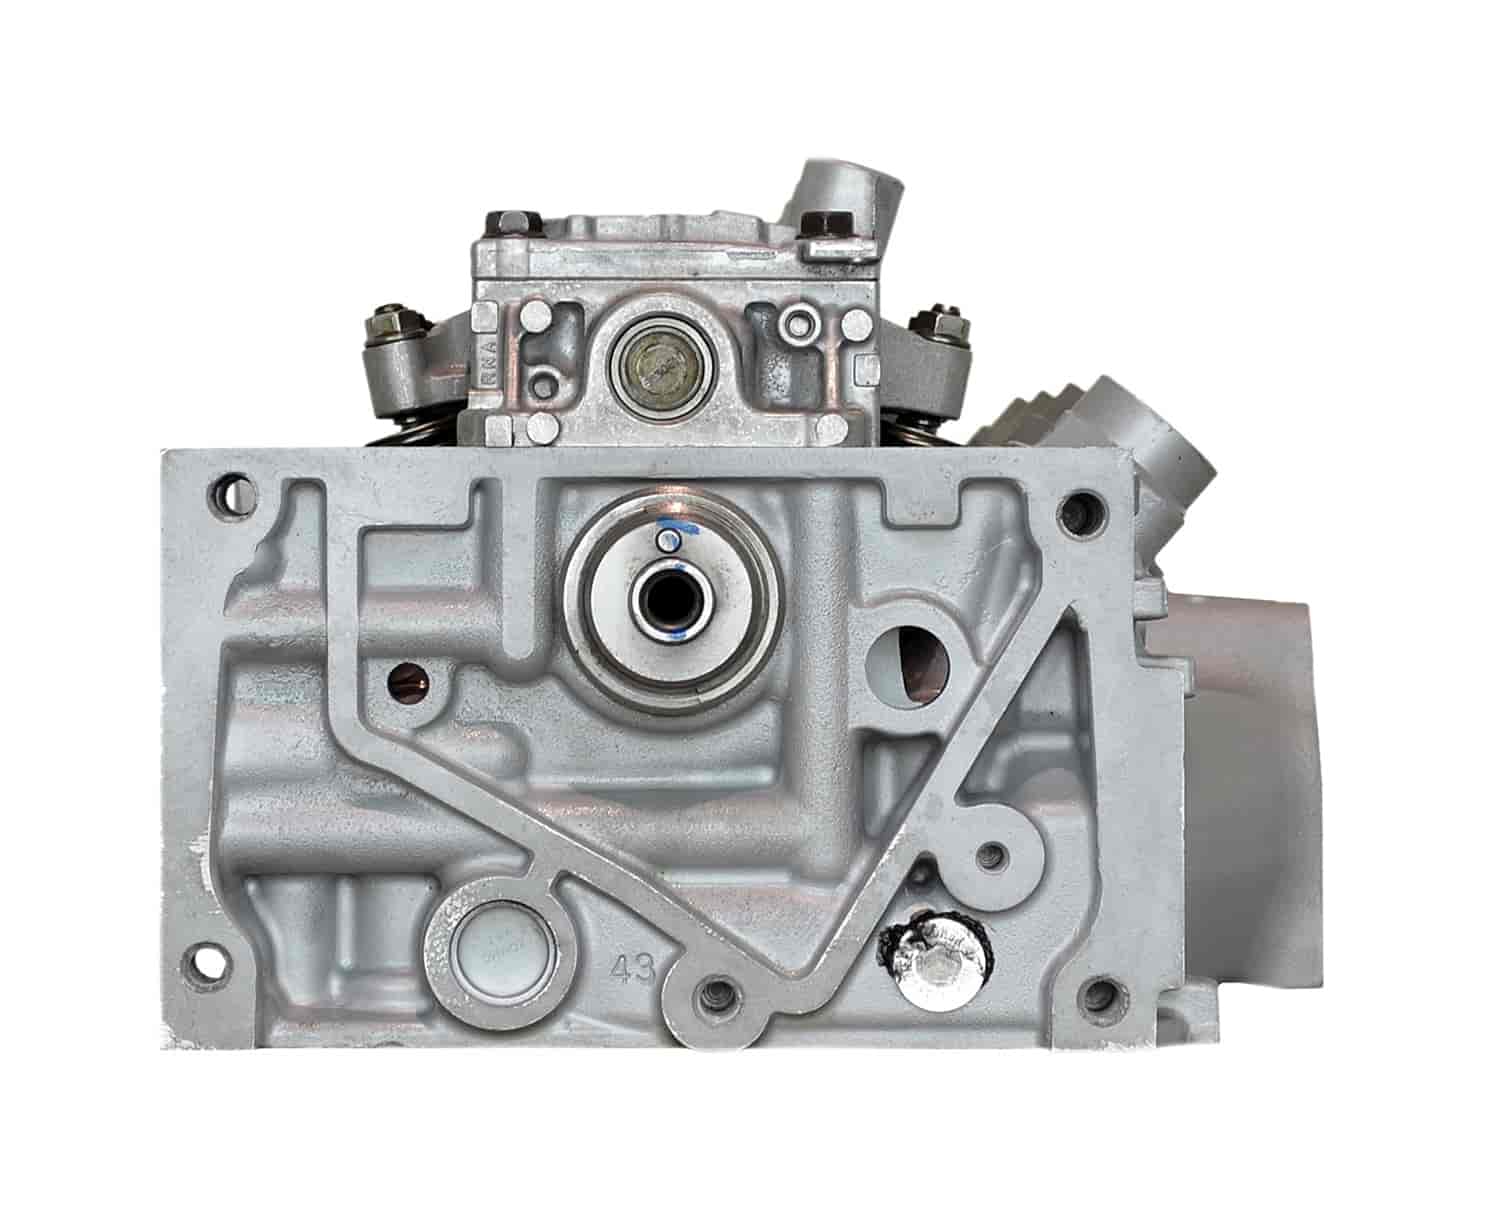 Remanufactured Cylinder Head for 2006-2011 Honda Civic with 2.4L L4 R18A1